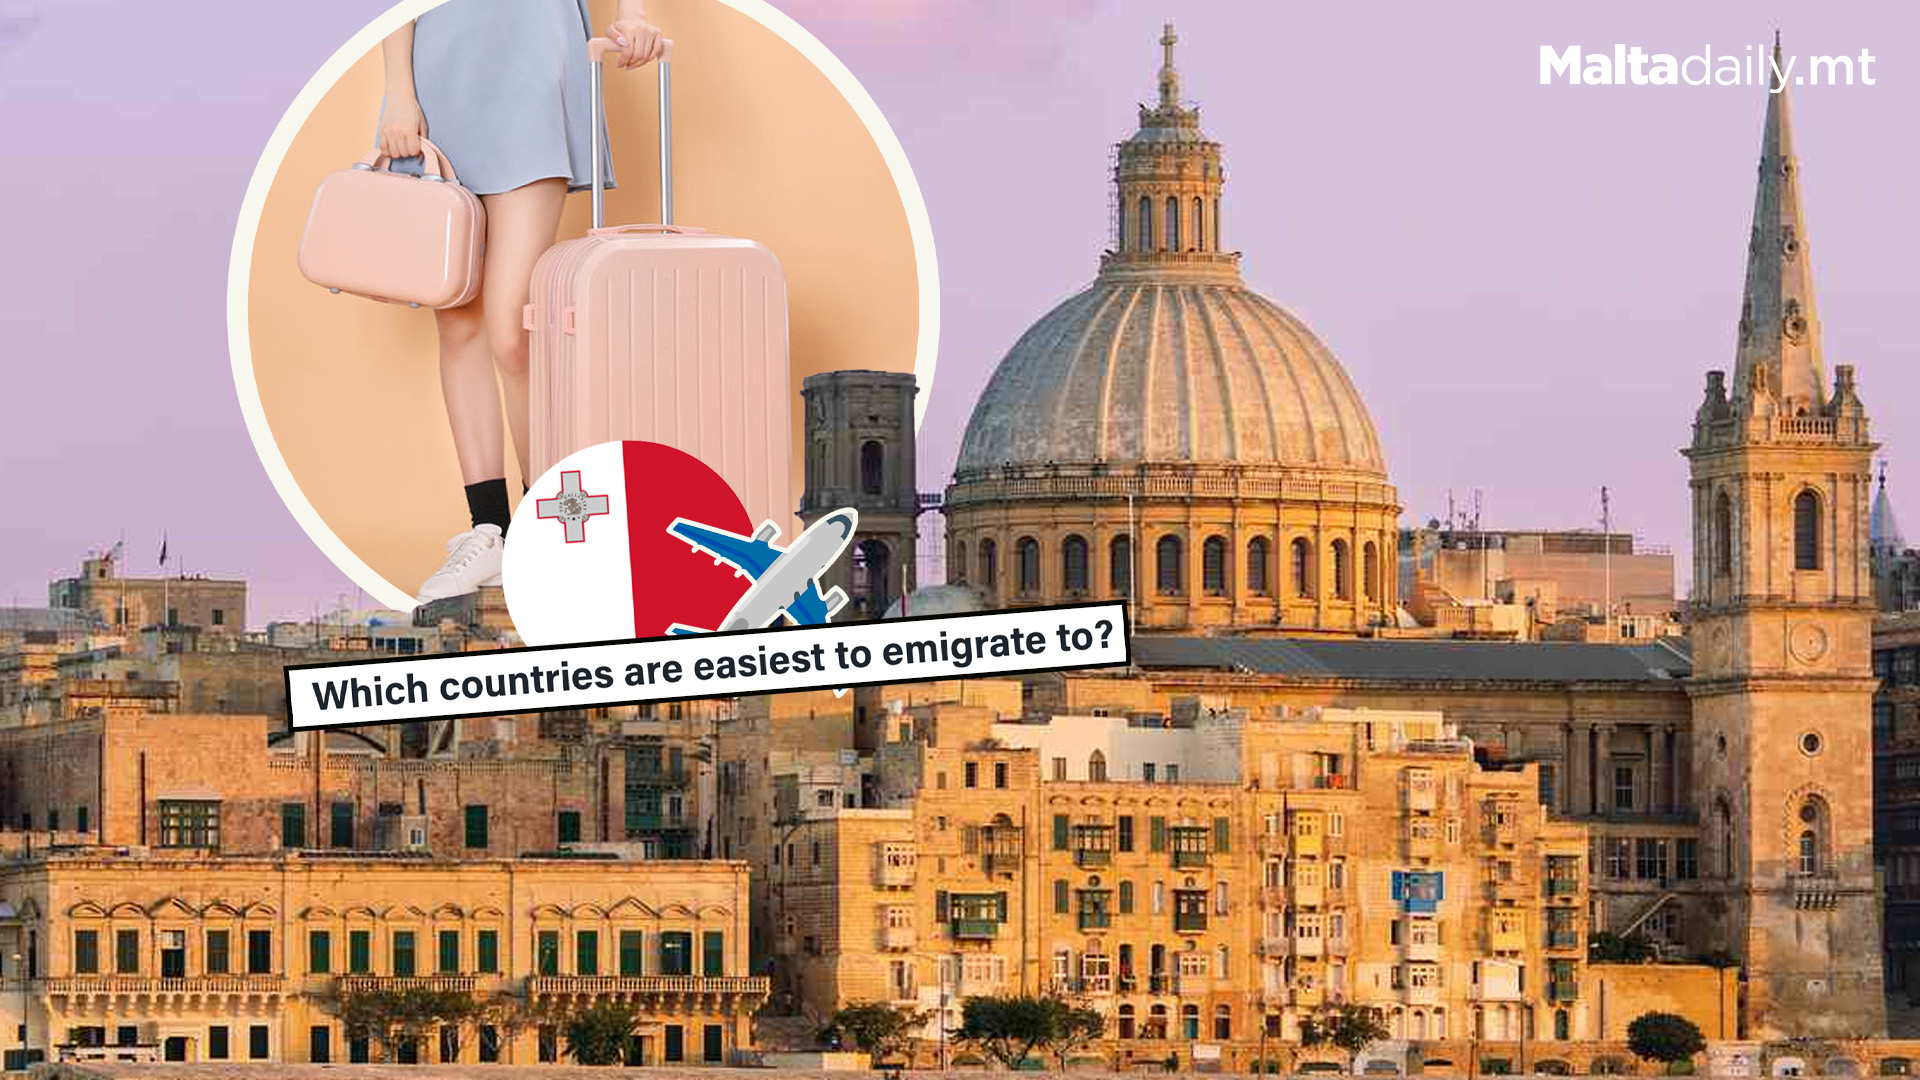 Malta 2nd Easiest Country To Move To For Expats, Says Research